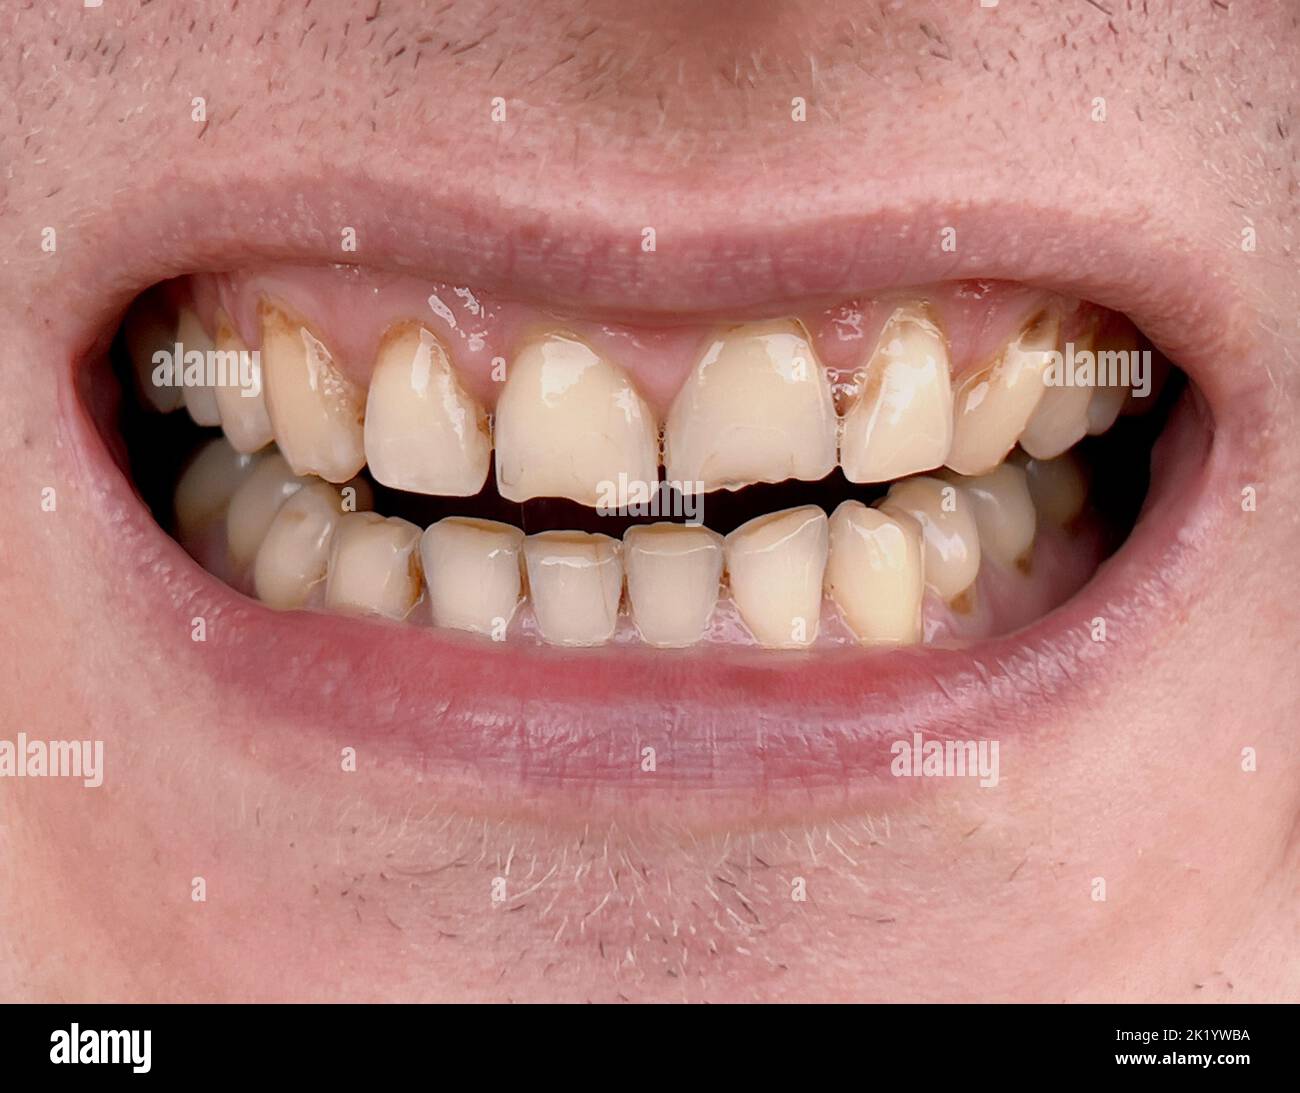 Smiling mouth of man with crooked yellow teeth close-up. Unhealthy worn teeth requiring treatment in dentistry. Bruxism Stock Photo